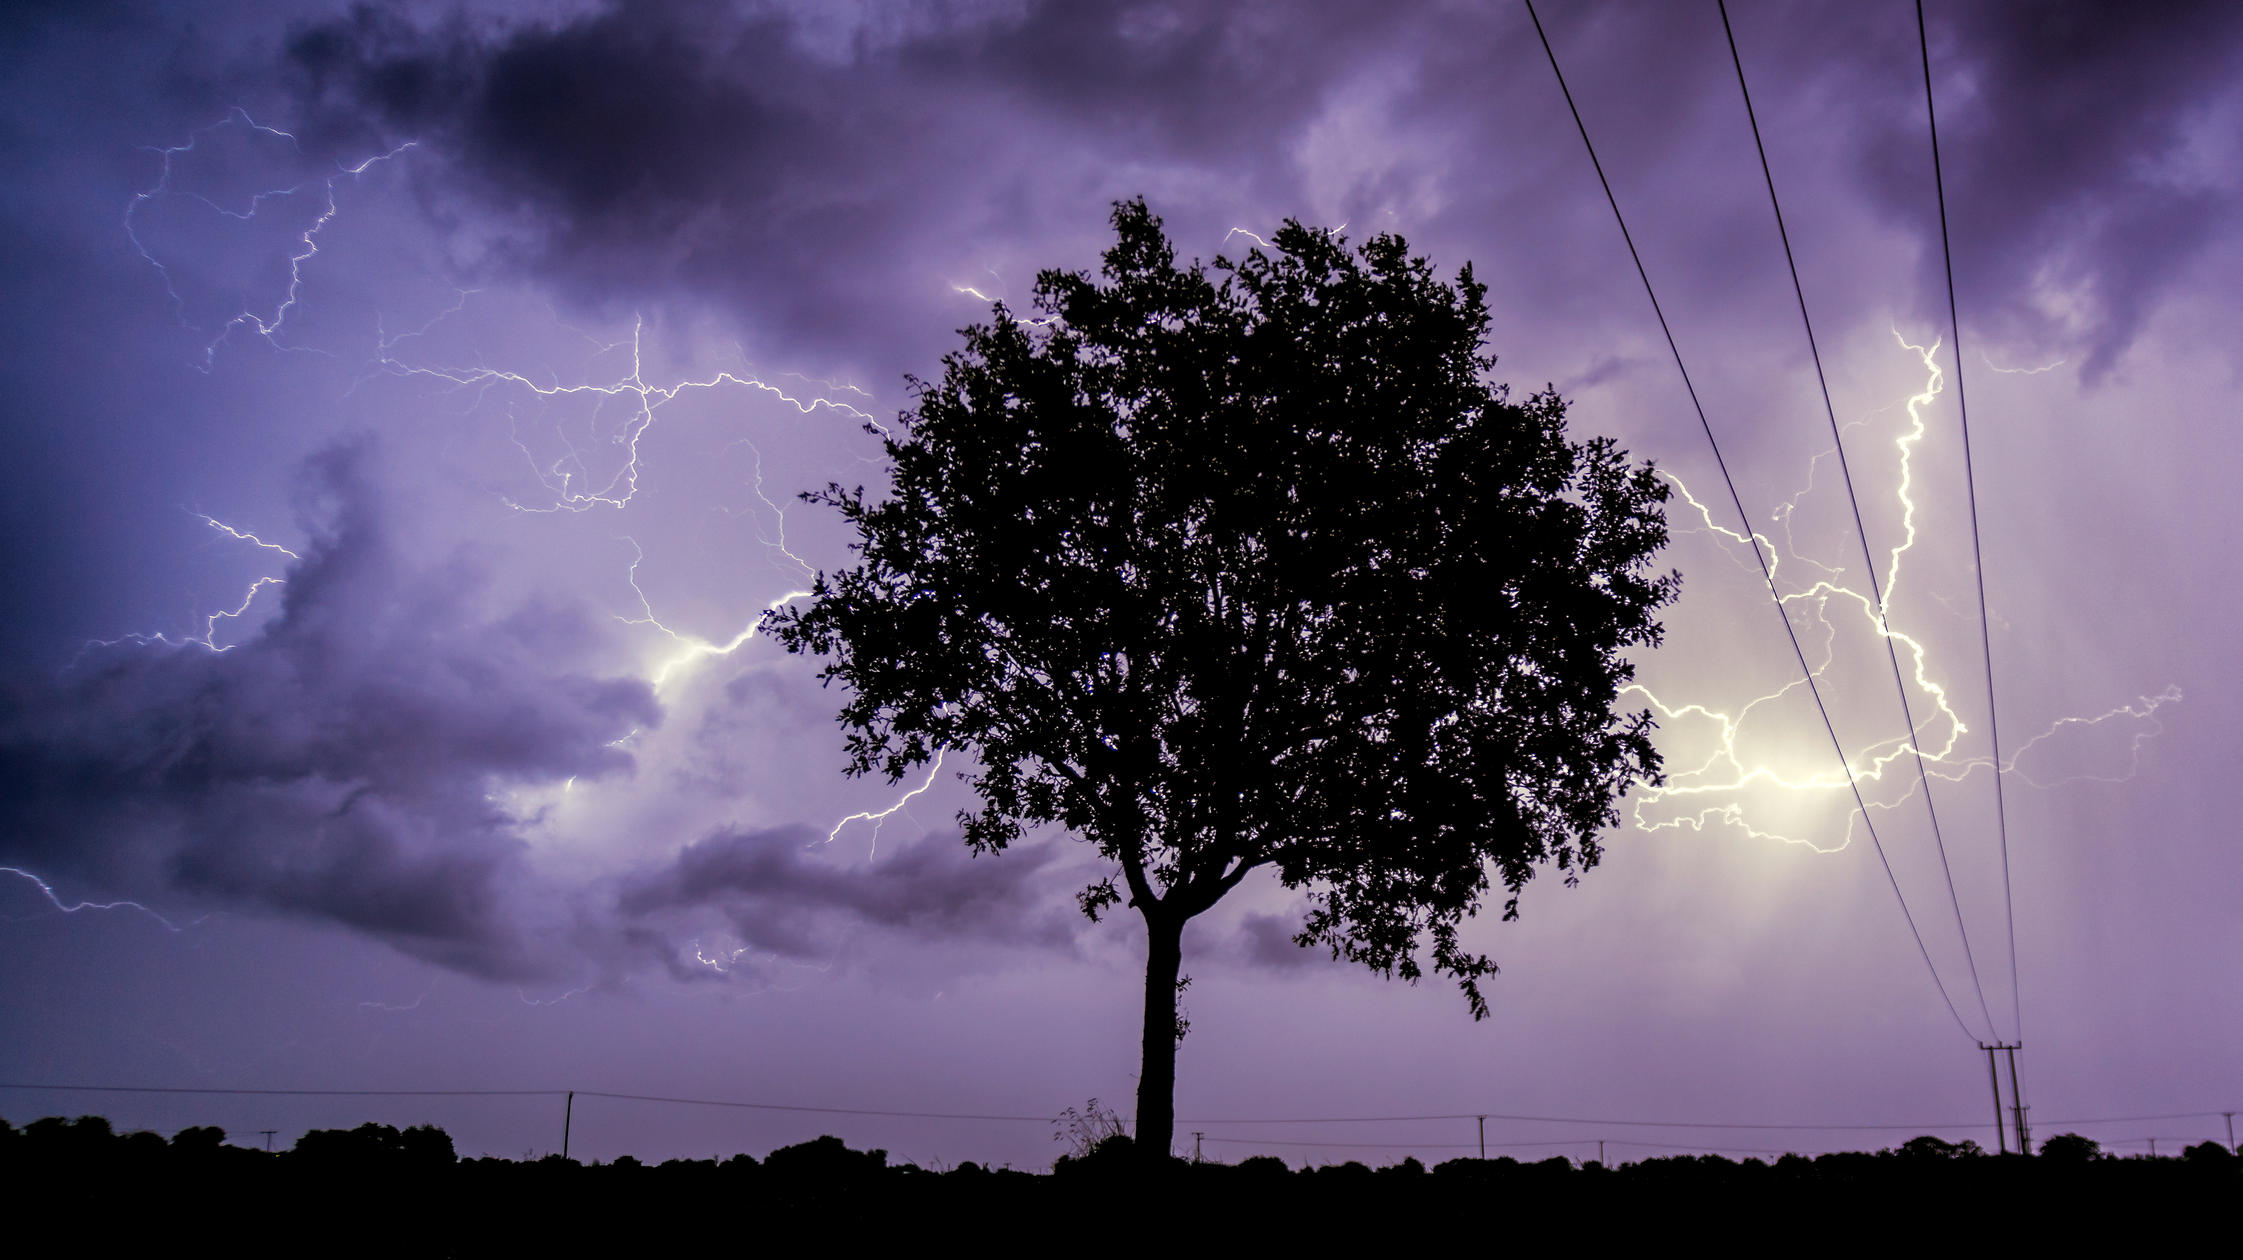 A silhouette of a tree against a stormy sky with lightning and clouds